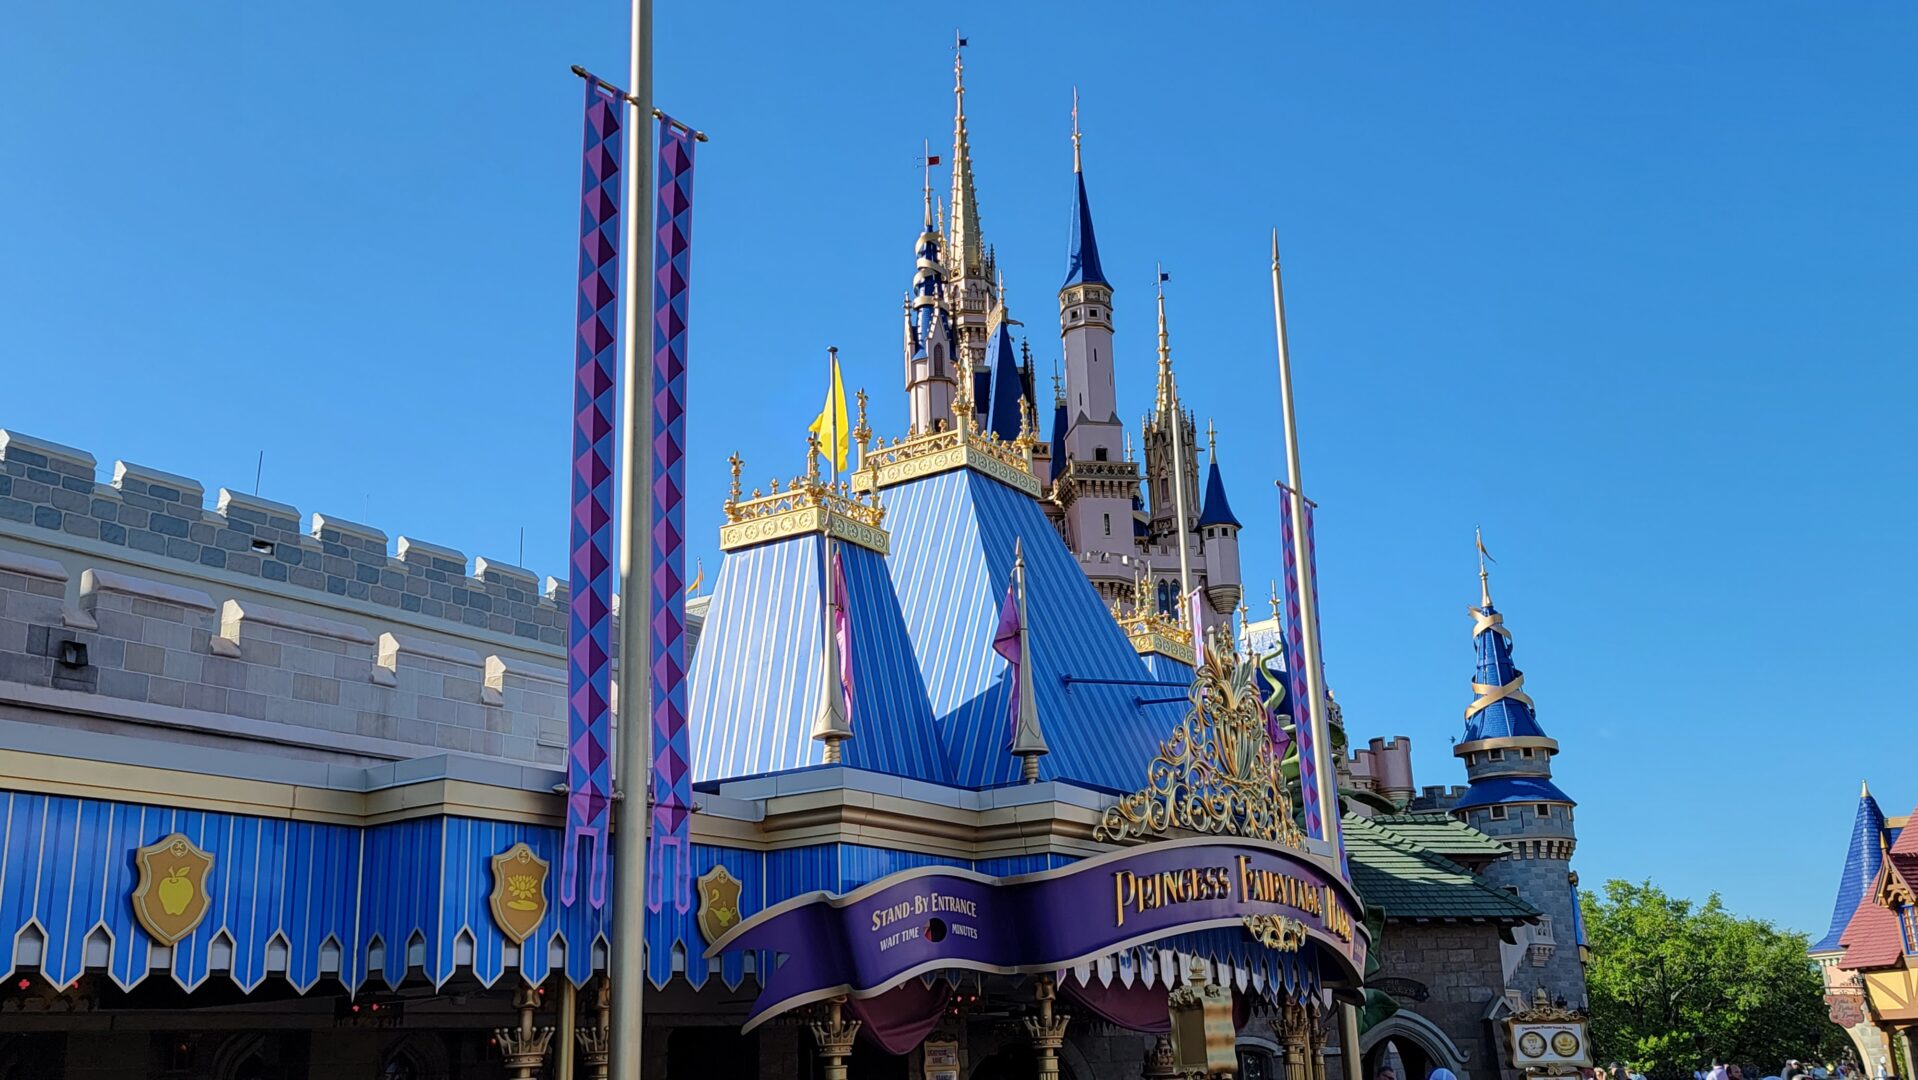 Banners have Returned to Princess Fairytale Hall in the Magic Kingdom